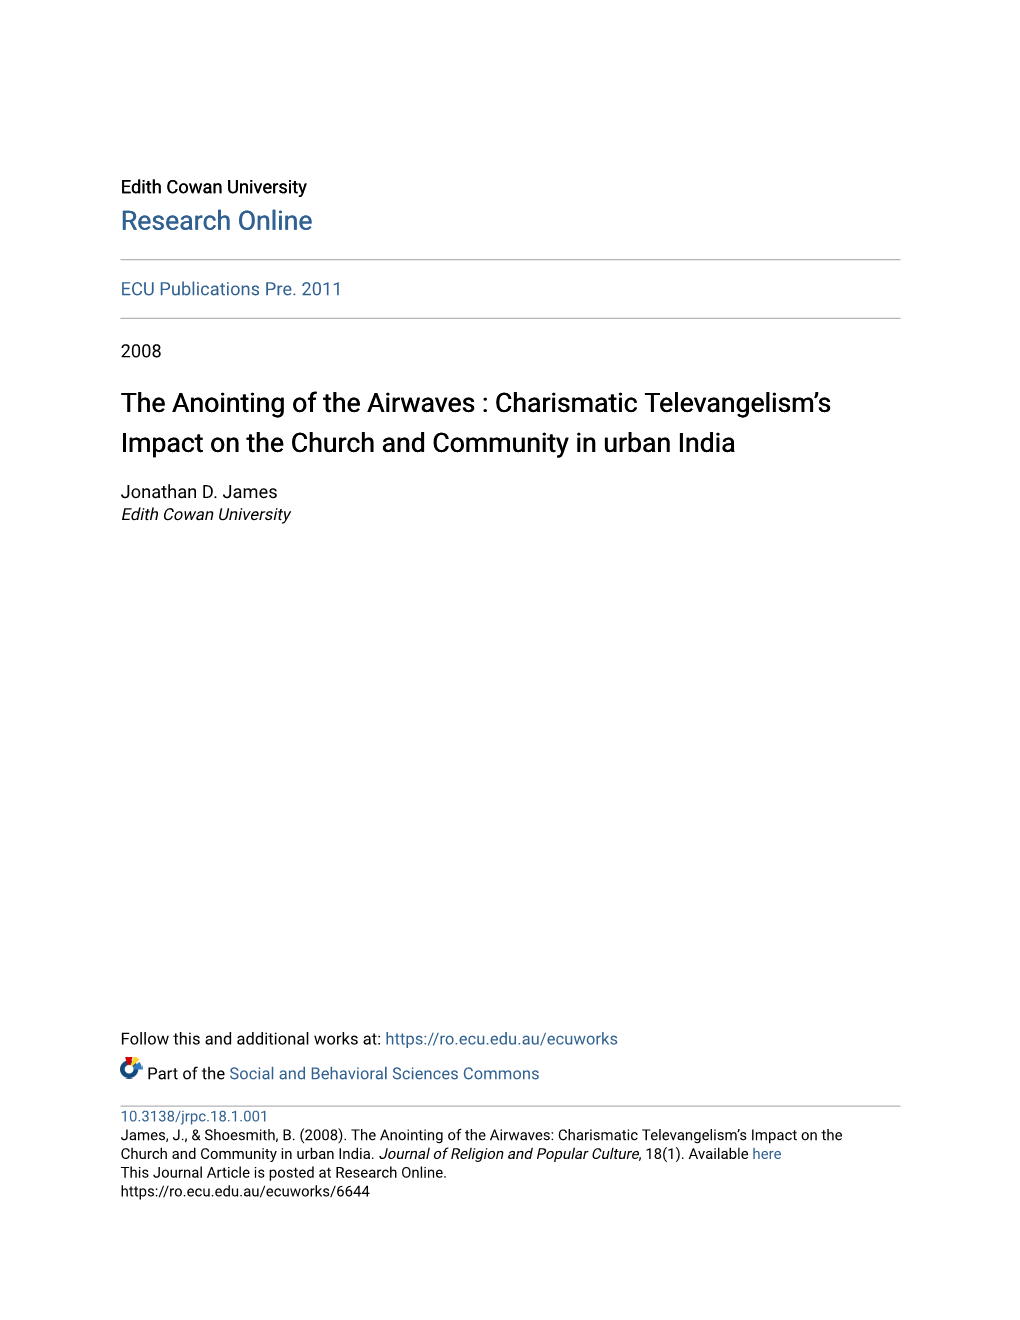 Charismatic Televangelismâ•Žs Impact on the Church and Community in Urban India